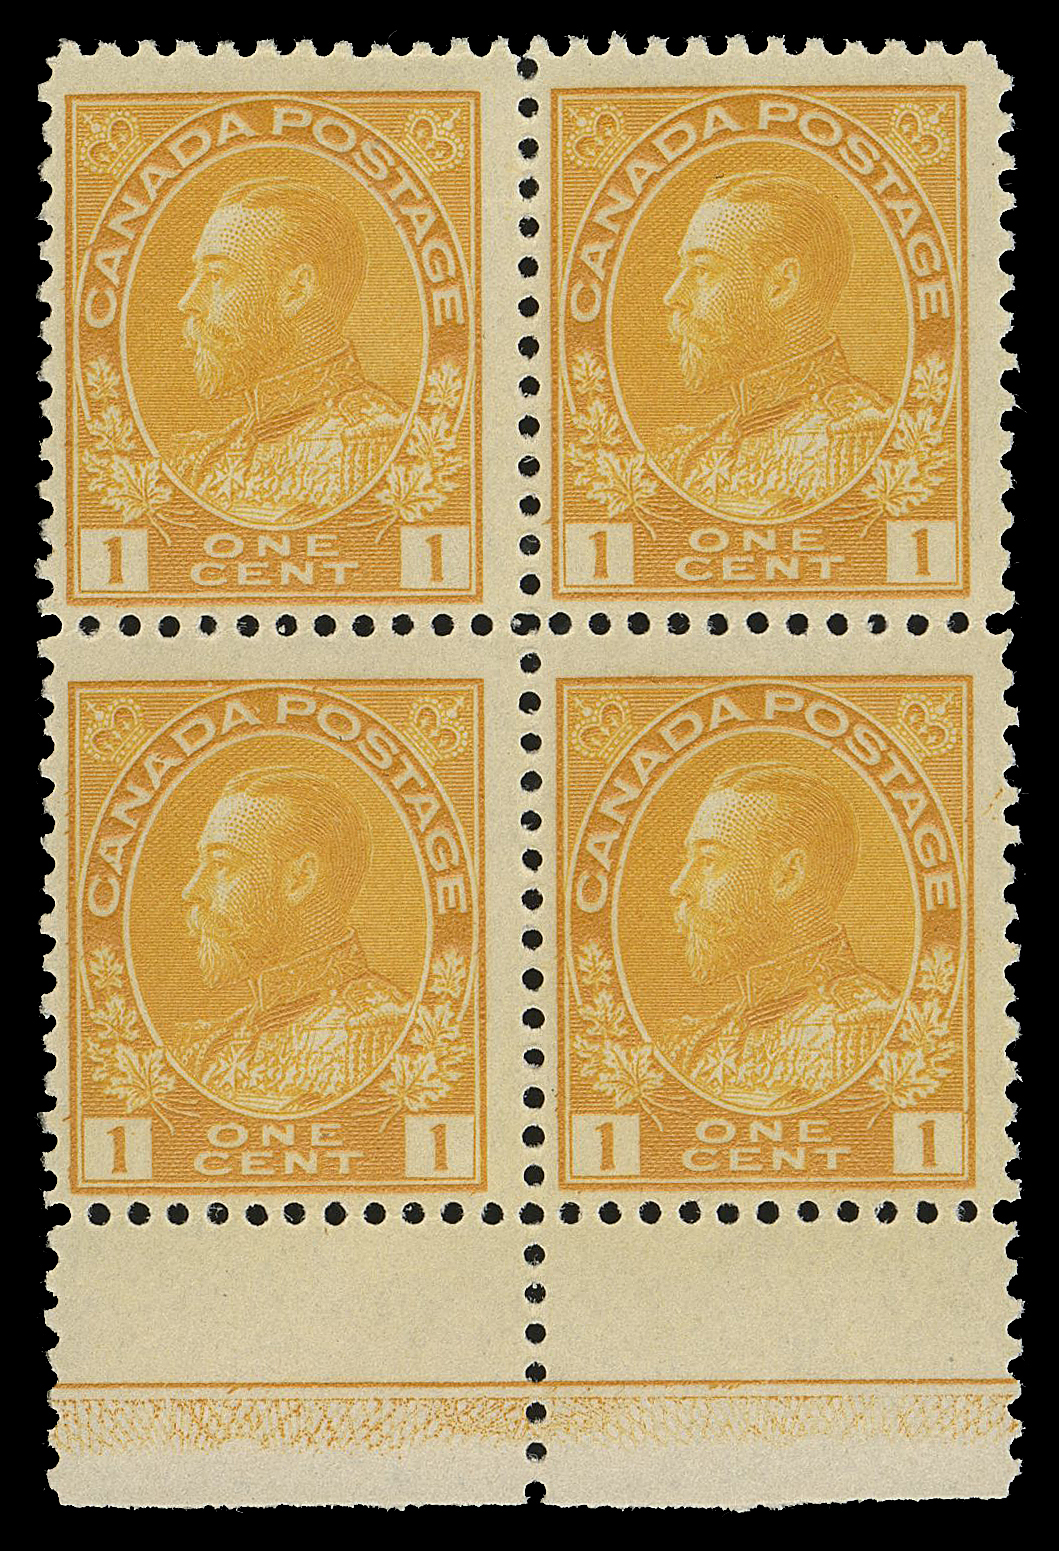 ADMIRAL STAMPS  105,Mint block with deep rich colour, displaying very scarce Type D1 lathework of usual strength and key elements of the lathework type discernible, LH at top, lower pair and lathework margin NH, Fine (Unitrade cat. as two NH singles)